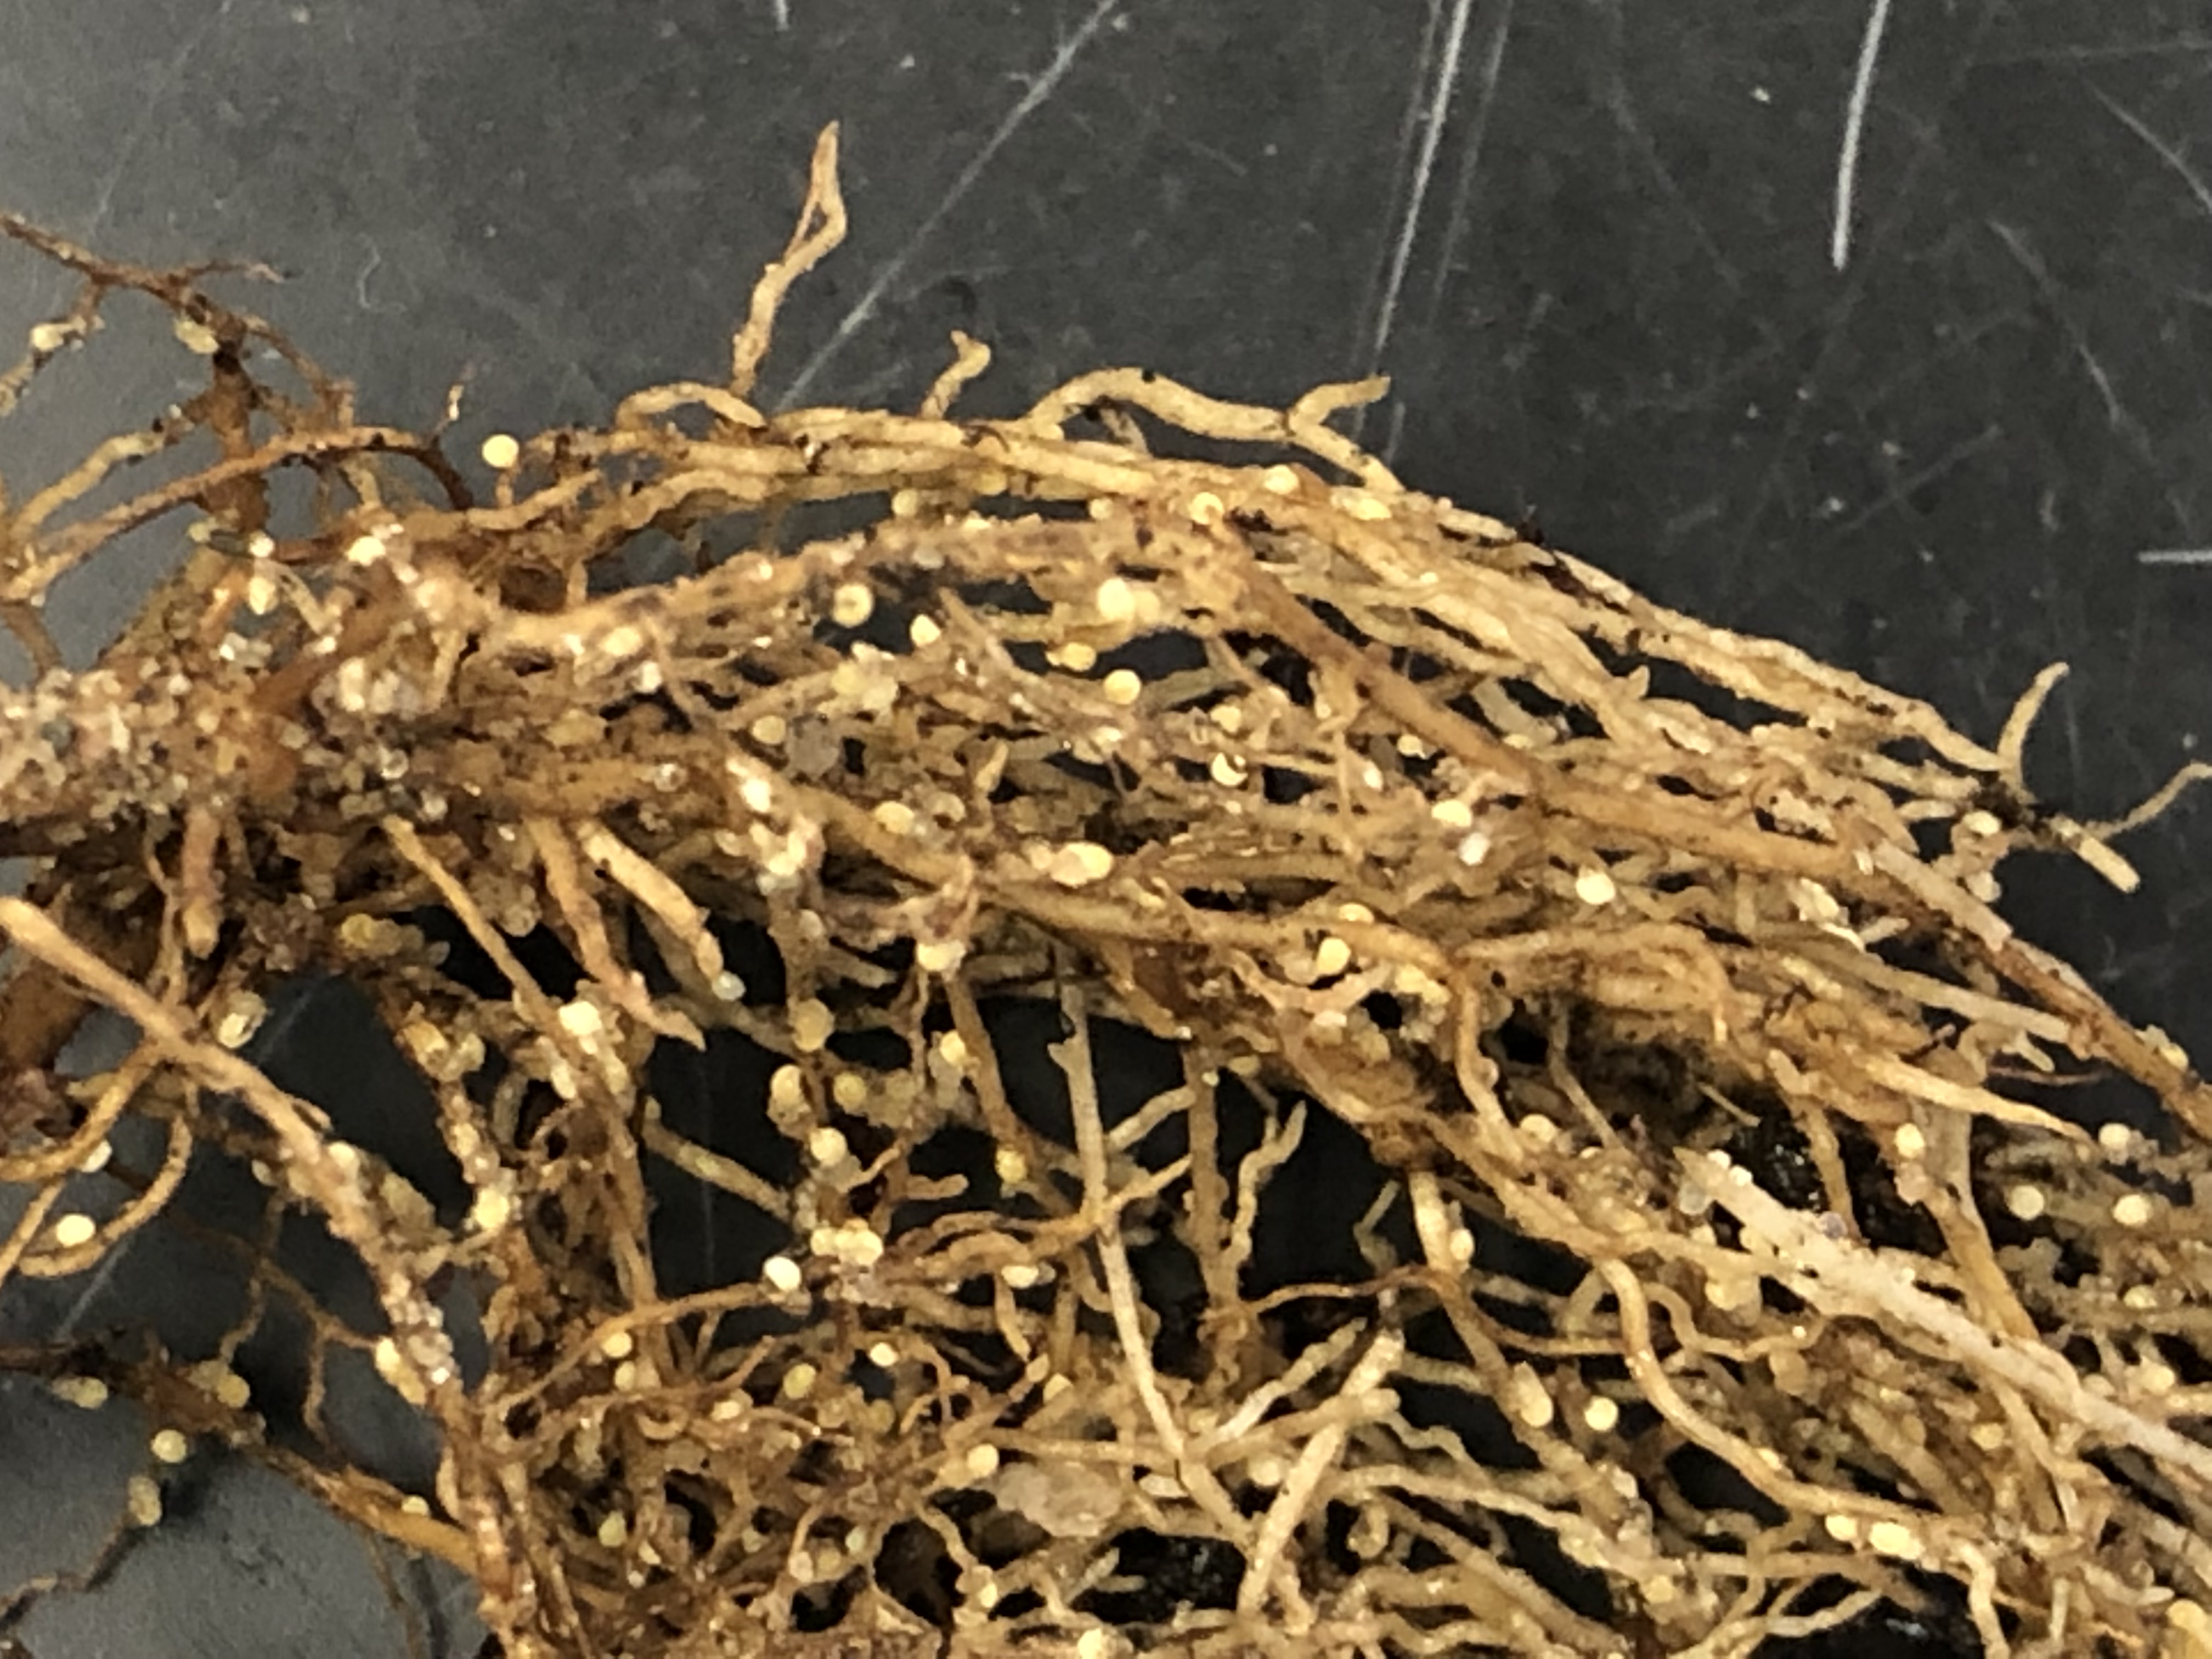 Soybean cyst nematode on roots.